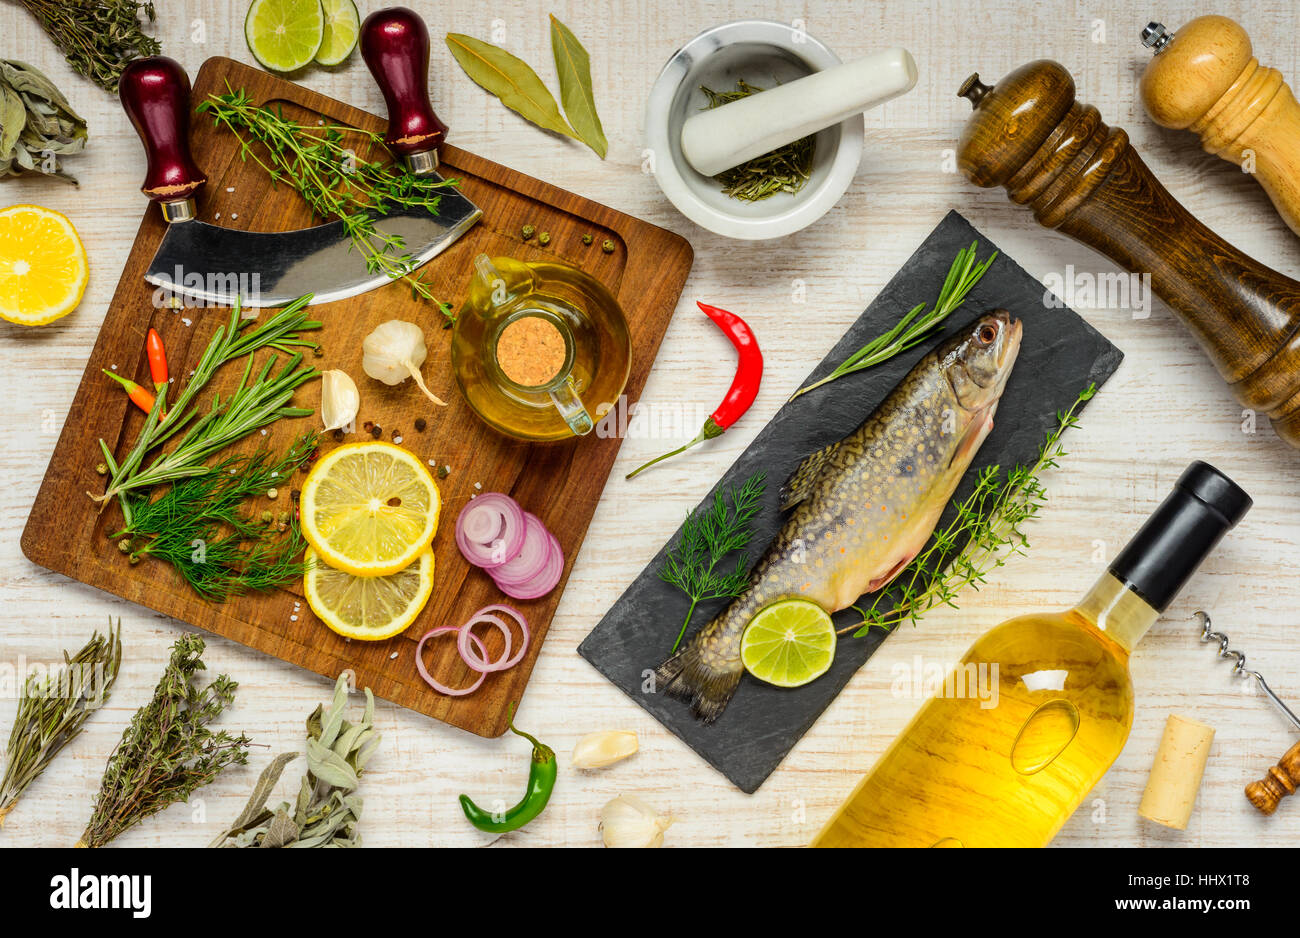 Raw Rainbow Trout Fish with Herbs, spices, seasoning and cooking ingredients. Stock Photo